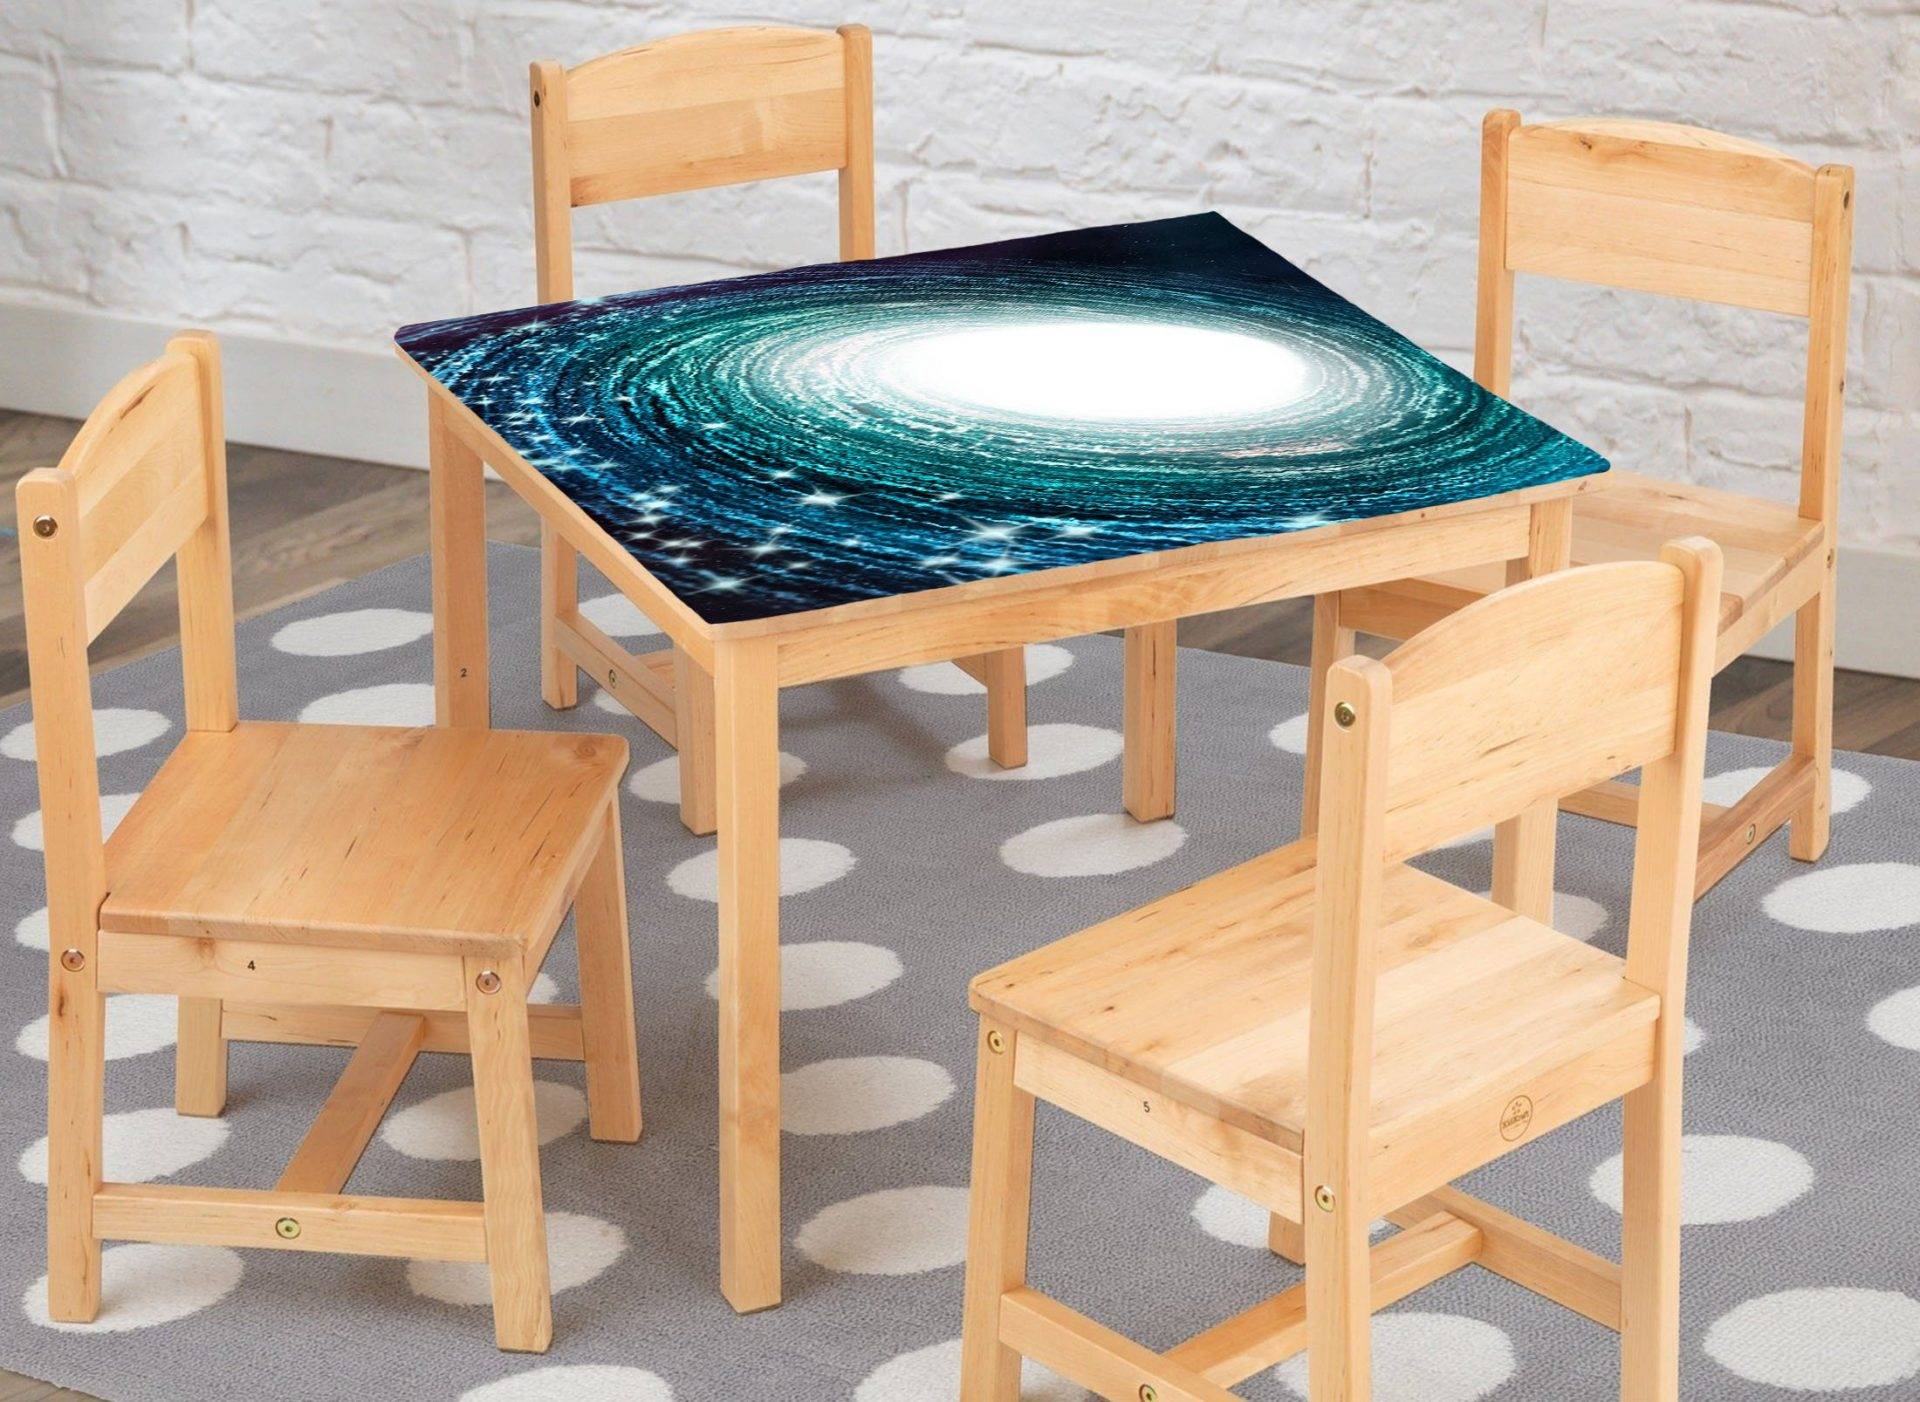 Galaxy the Stars Laminated Vinyl Cover Self-Adhesive for Desk and Tables